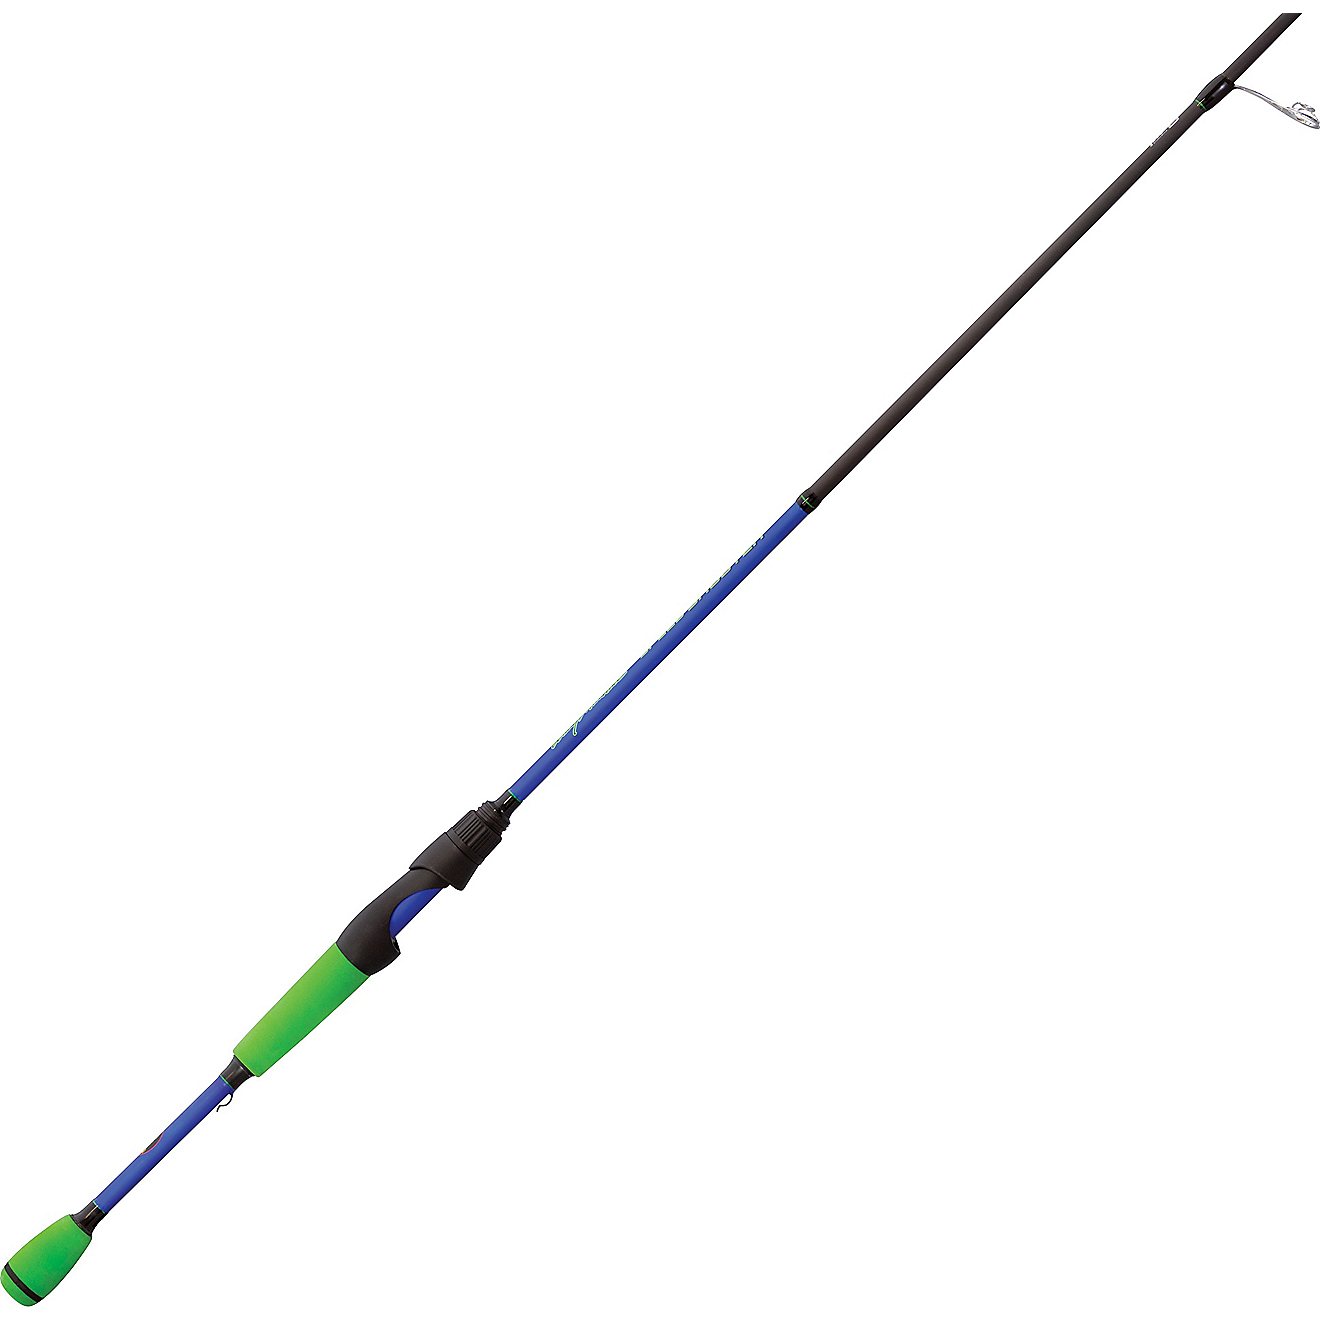 WMSS66M  Crappie Pole Rod 6'6" Lew's Lews Wally Marshall Speed Shooter